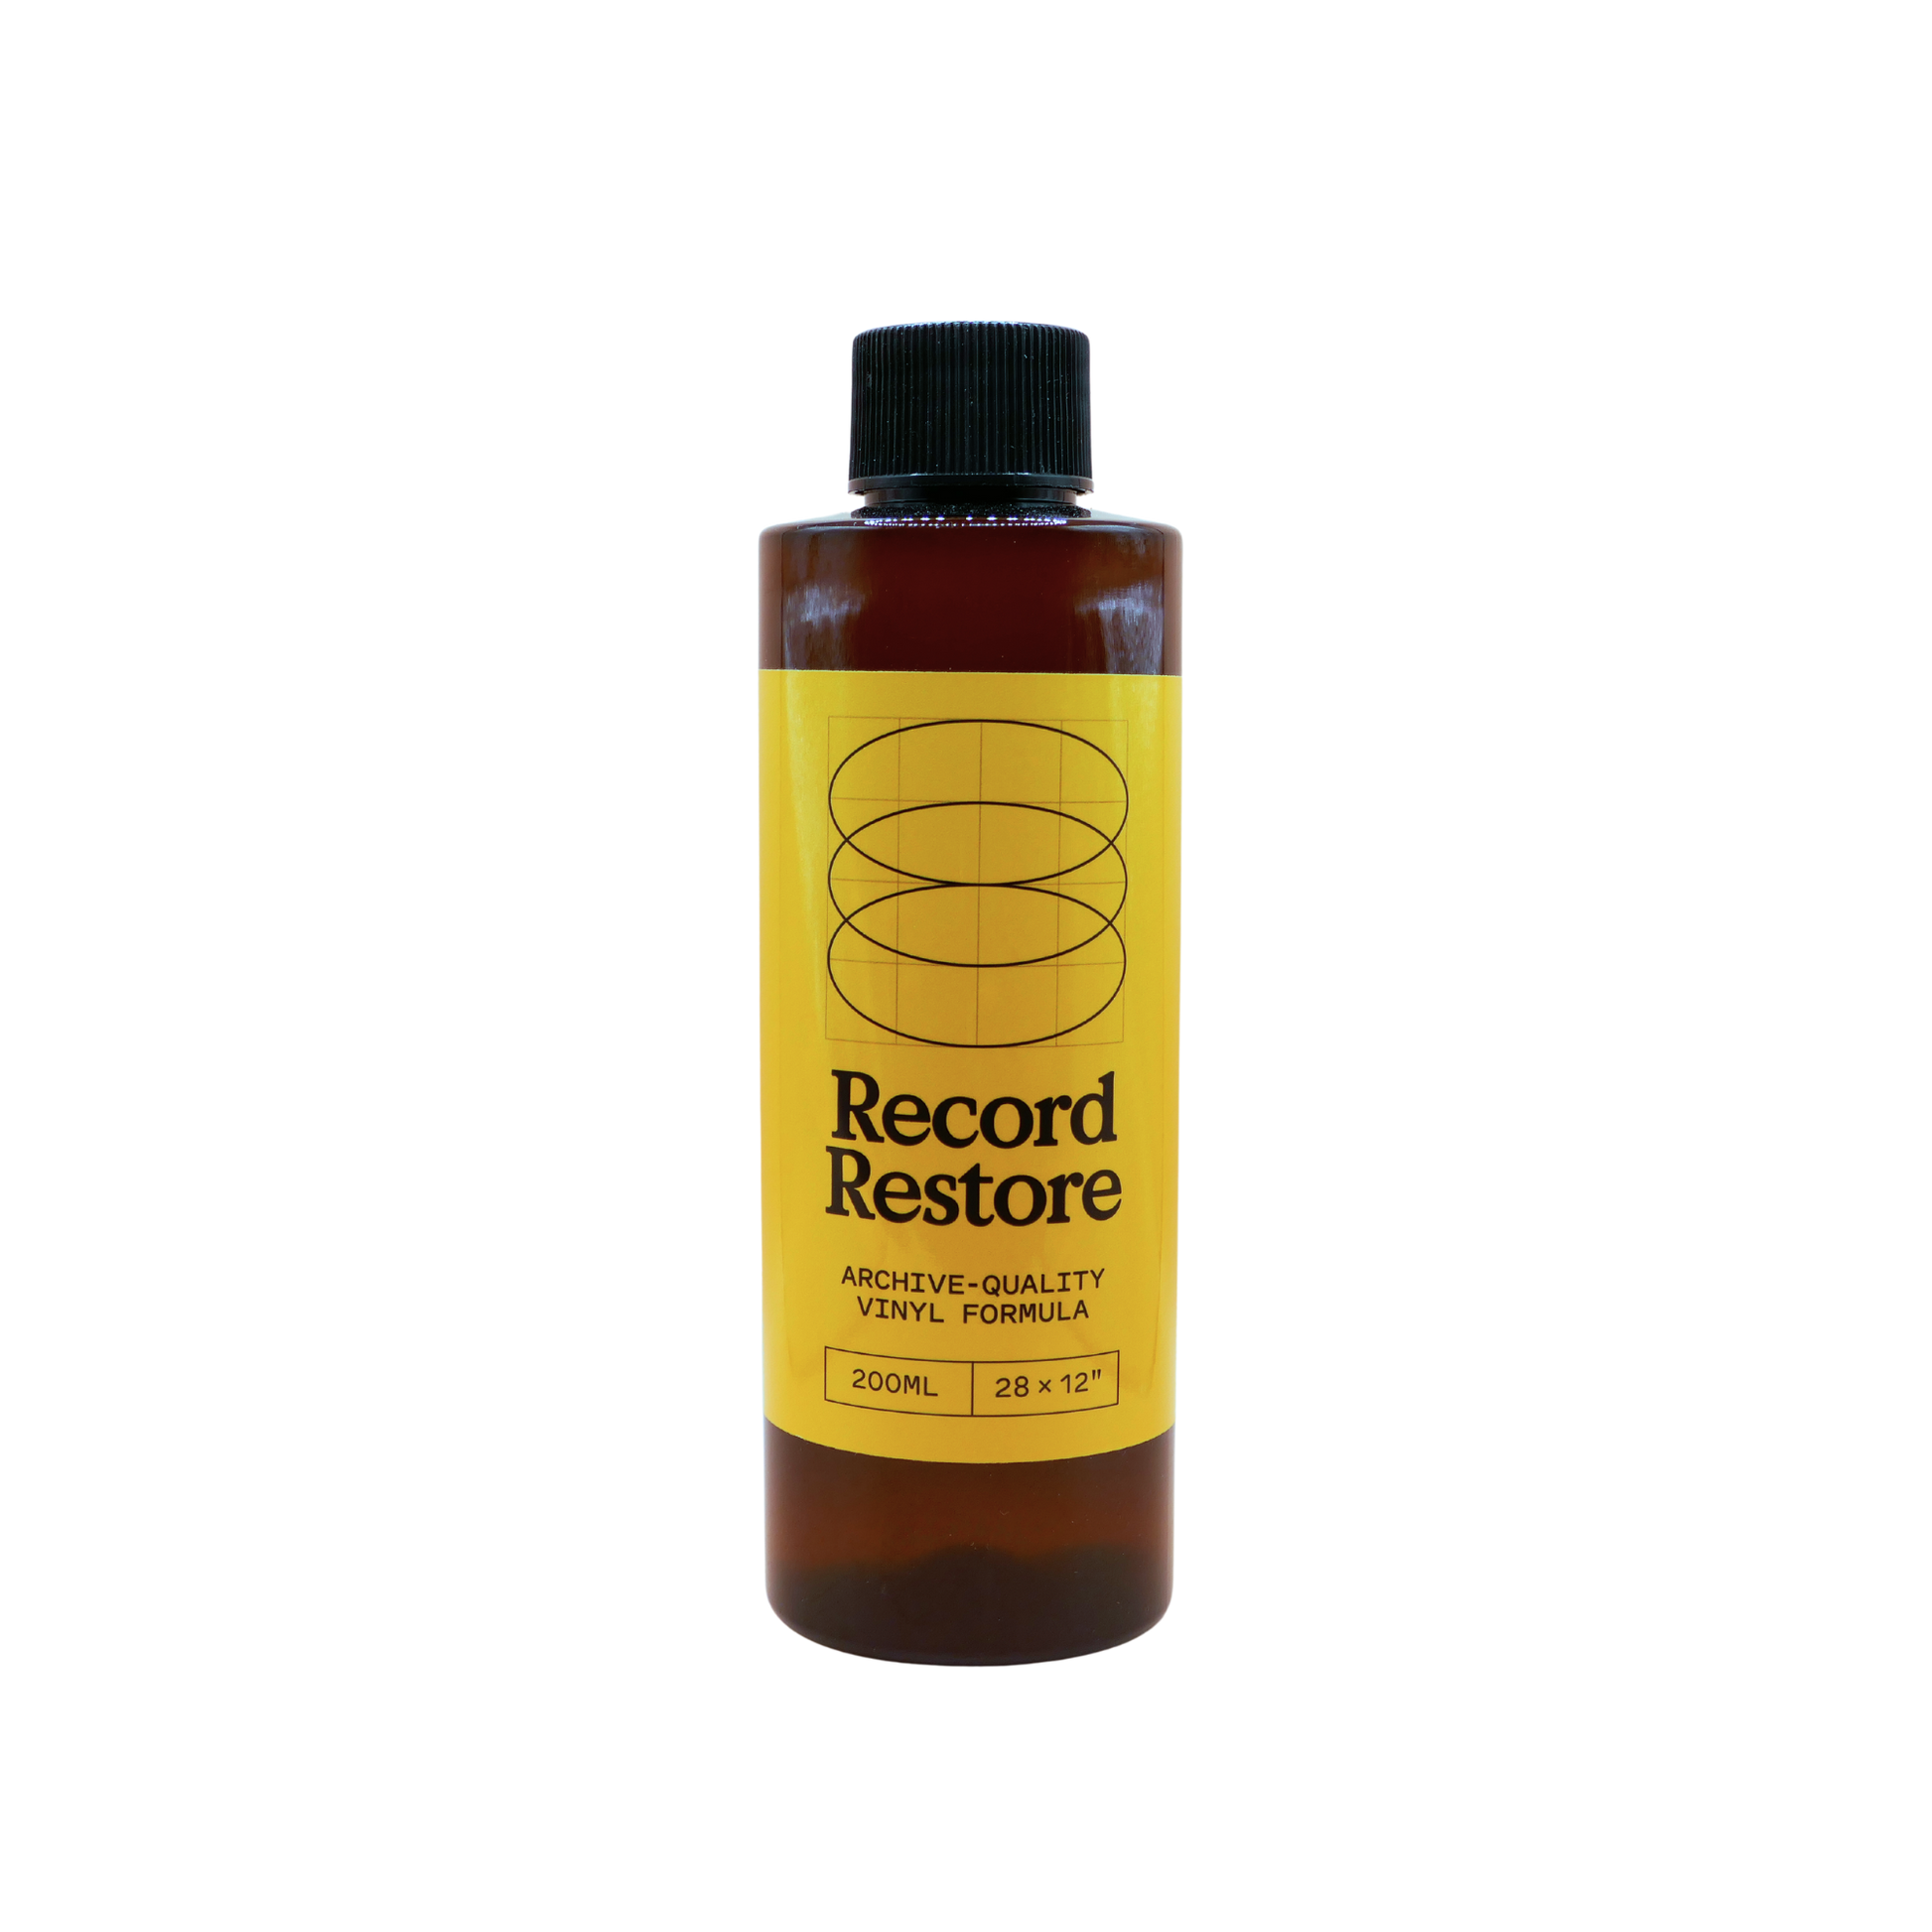 Record Restore Vinyl Record Cleaning Fluid Solution single bottle